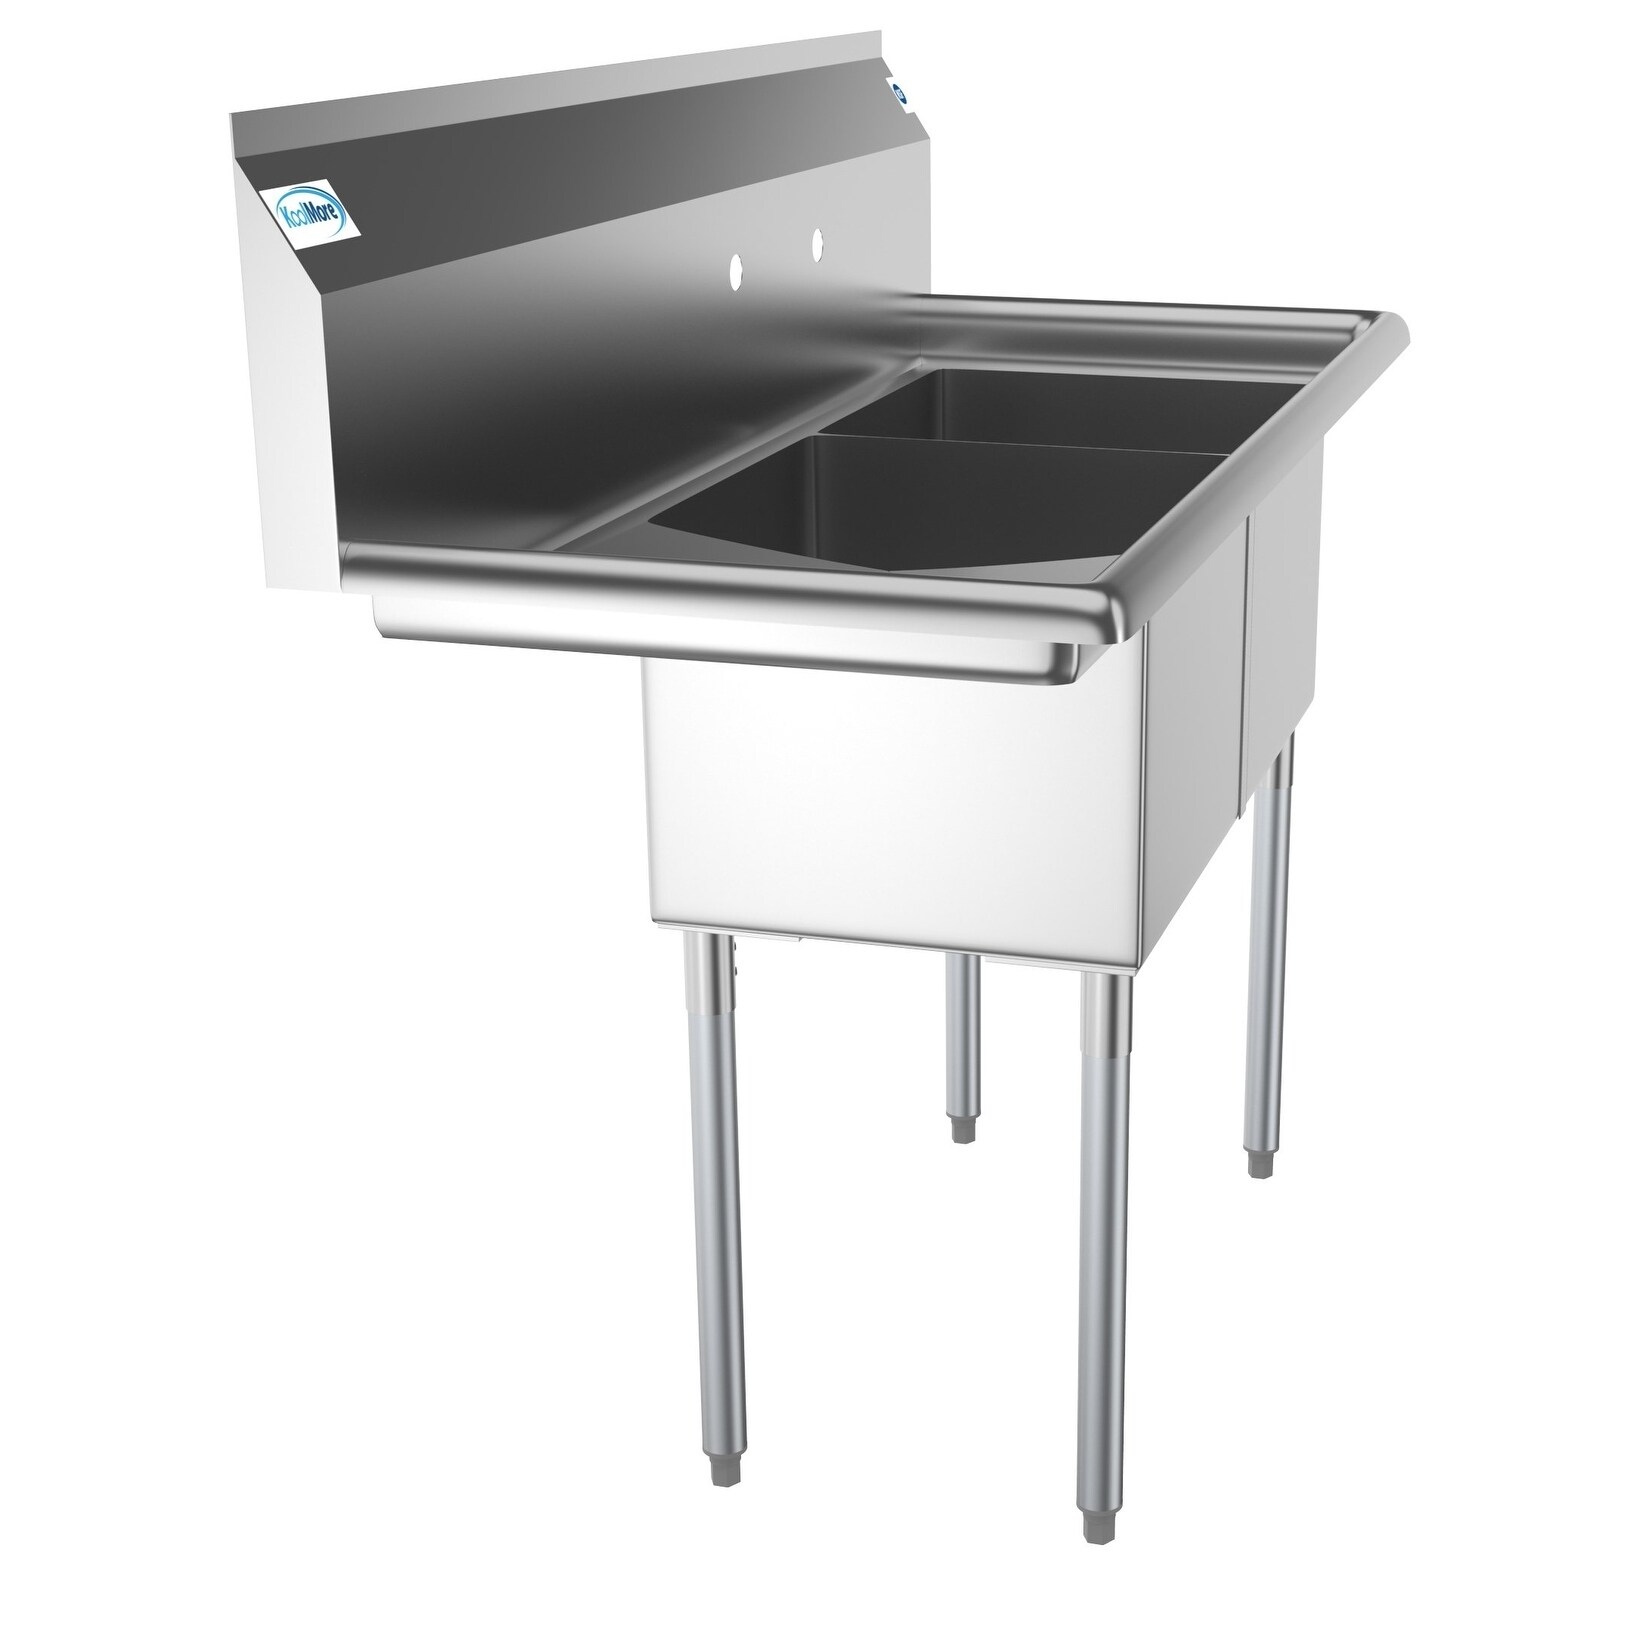 Koolmore 48 Inch Two Compartment Stainless Steel Commercial Prep Sink Left Drainboard